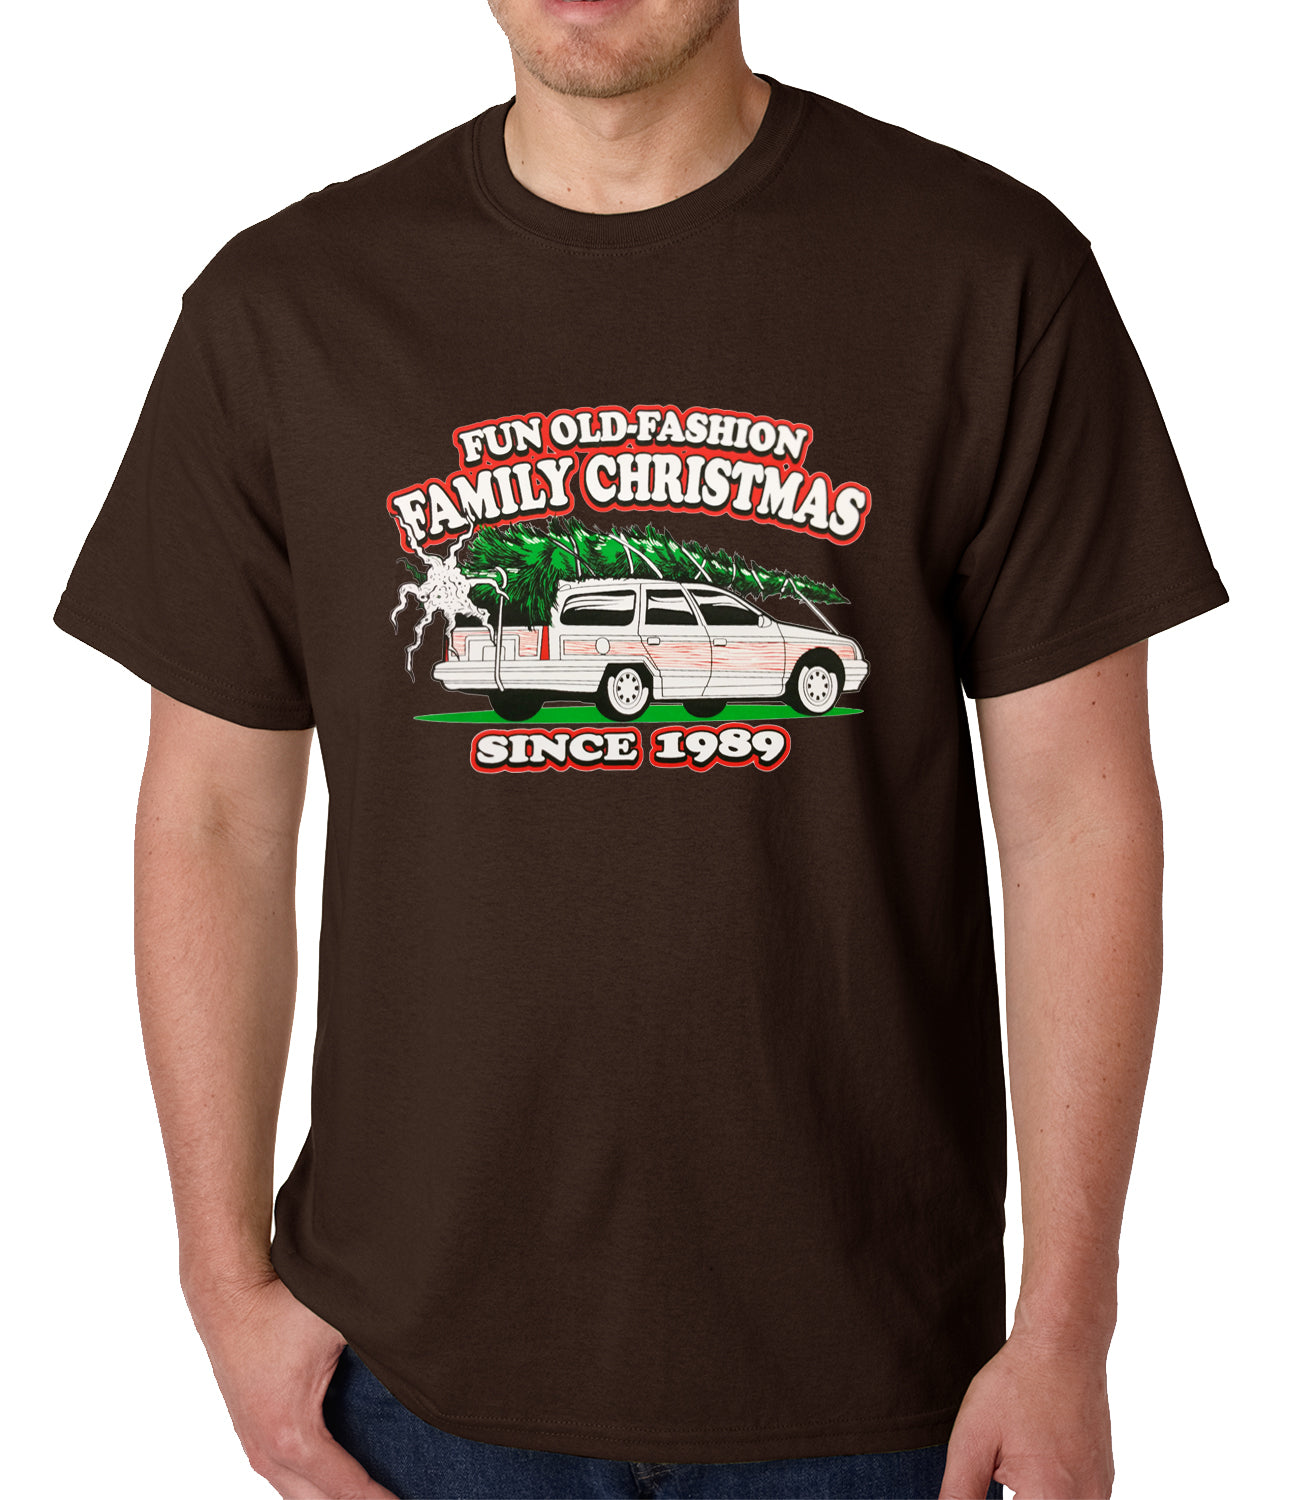 Fun Old-Fashioned Family Christmas Since 1989 Mens T-shirt